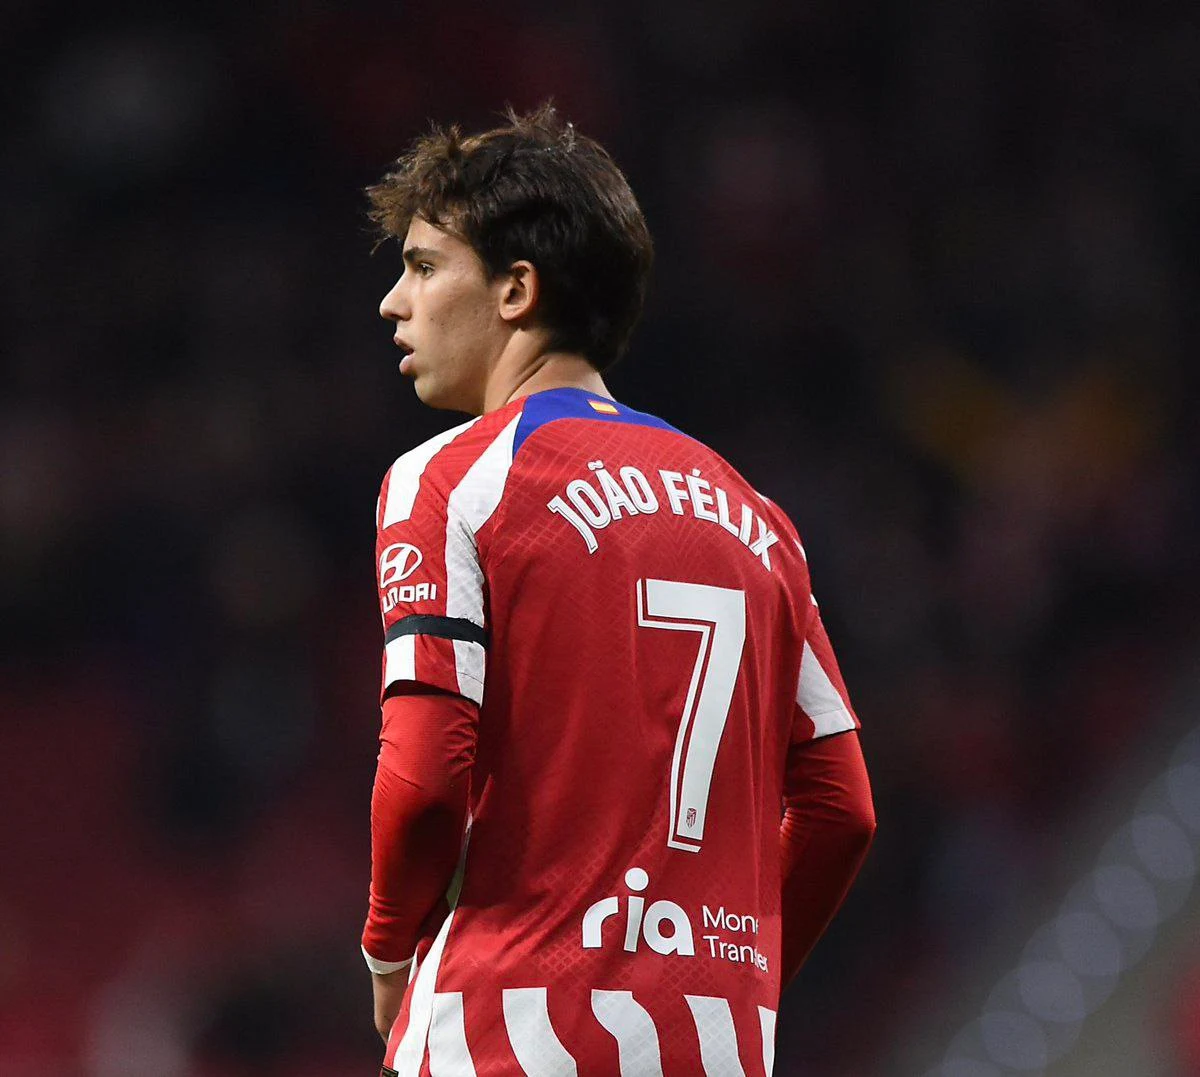 Joao Felix has been stripped of his No.7 jersey at Atletico Madrid